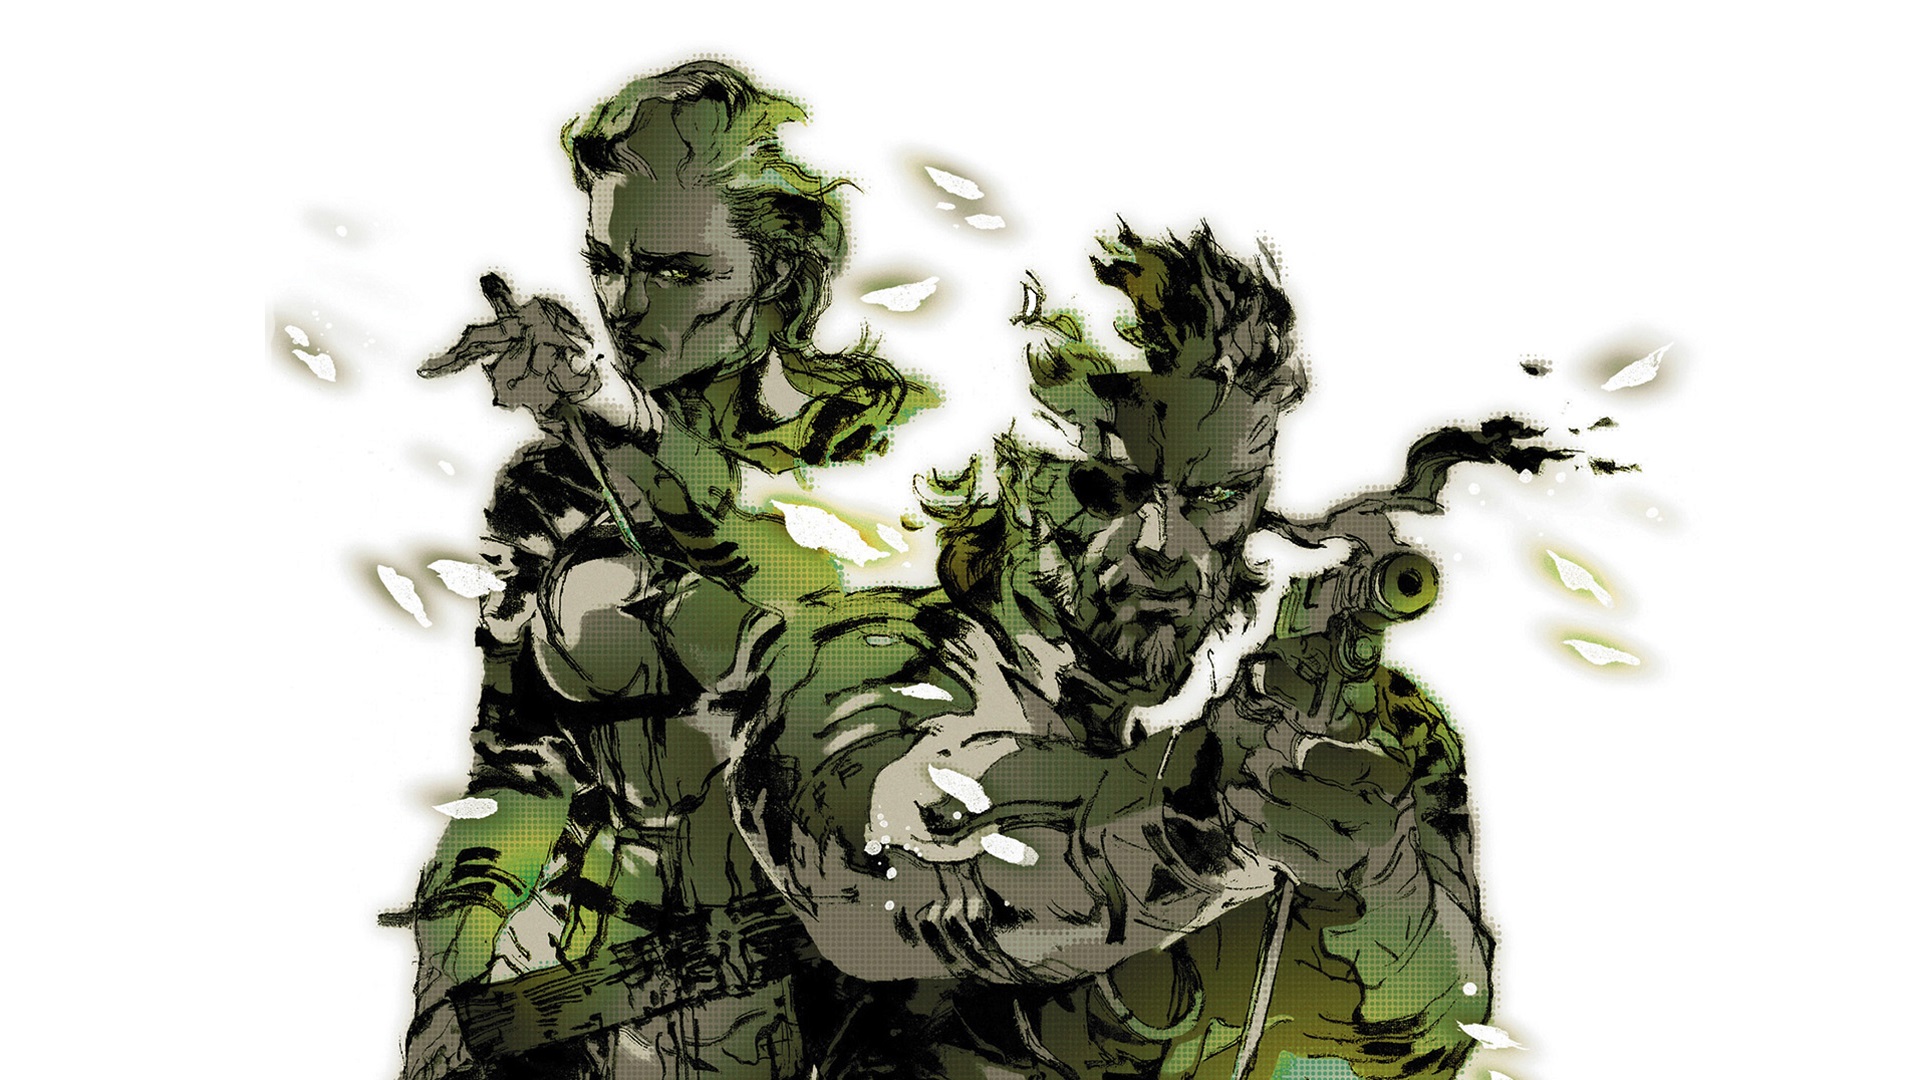 Metal Gear Solid 3 remake's level design looks identical to the original